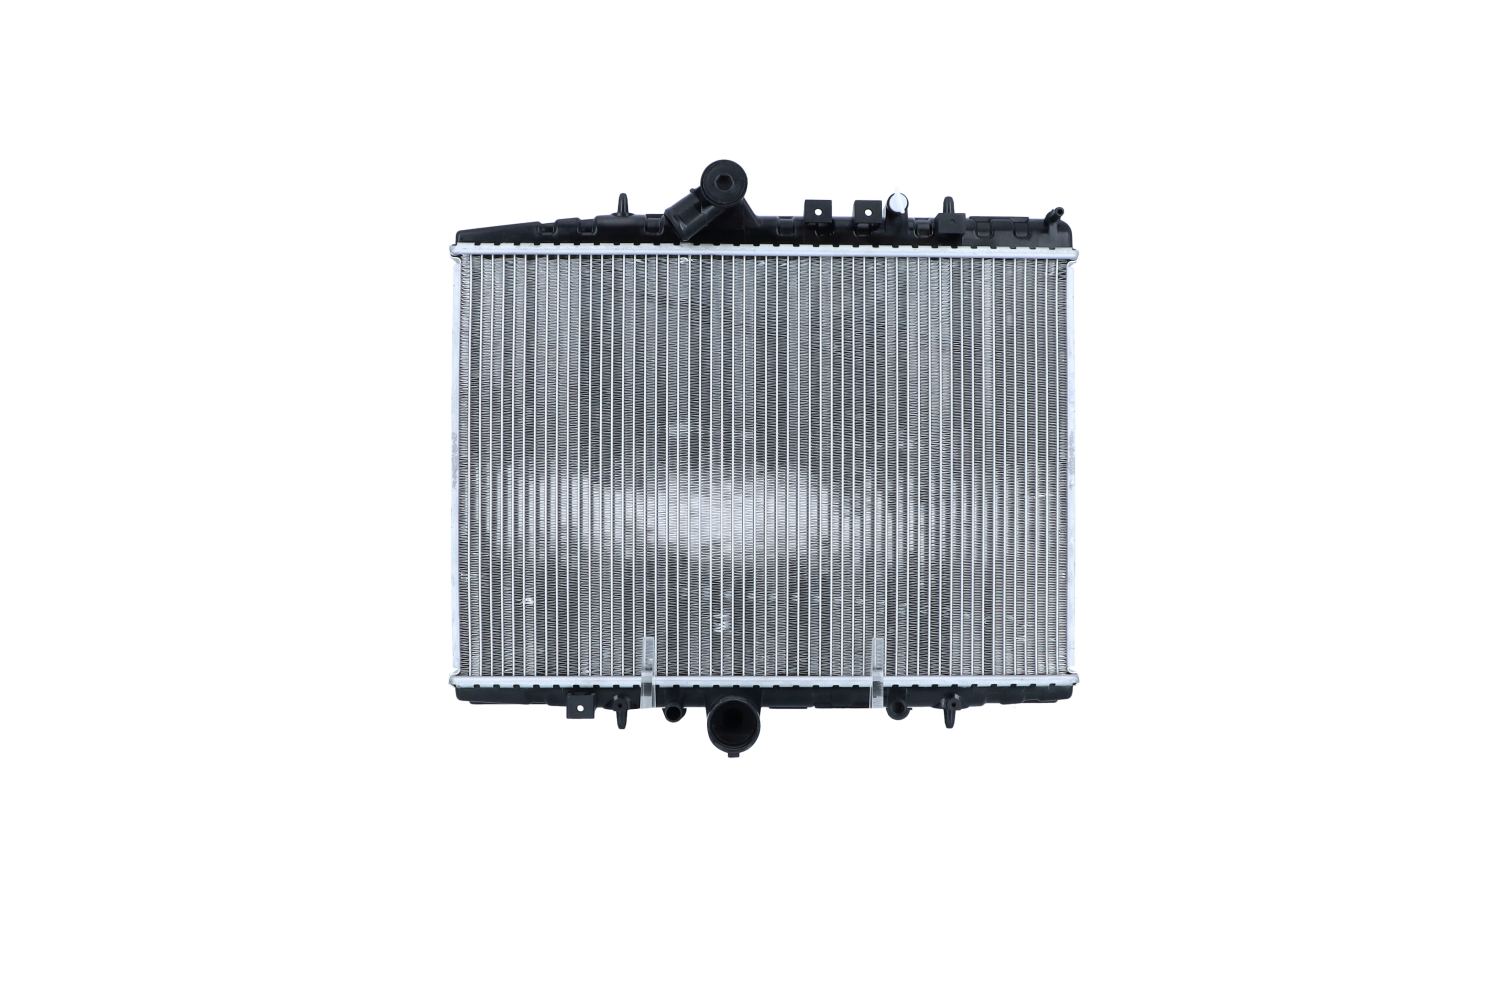 NRF 55346 Engine radiator Aluminium, 554 x 380 x 34 mm, with mounting parts, Brazed cooling fins